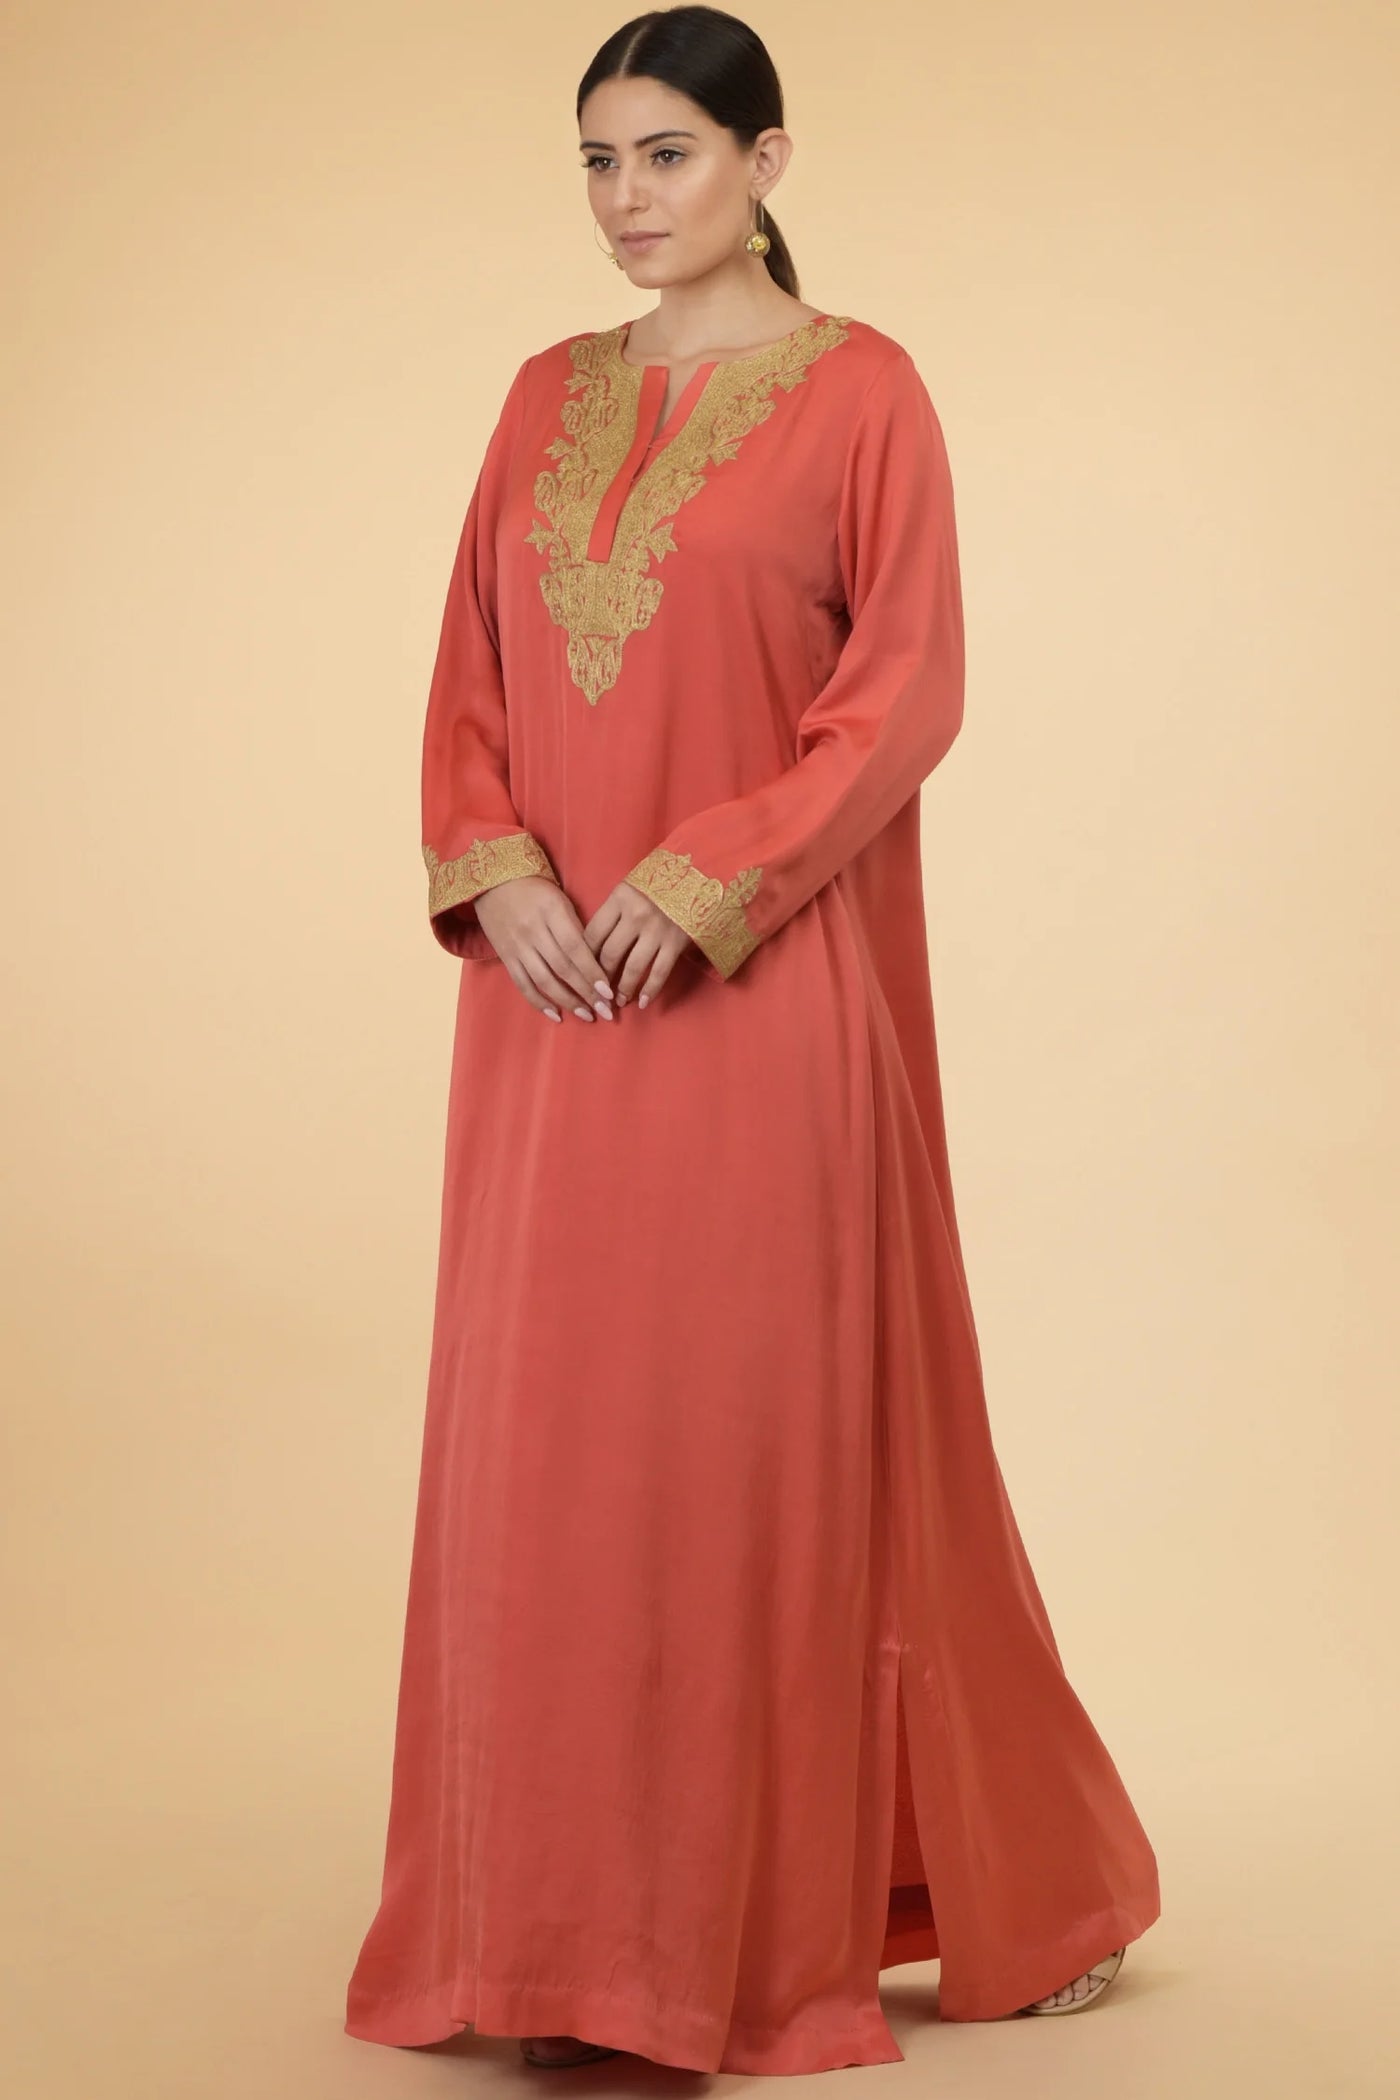 Coral Modal Satin Kaftan Indian Clothing in Denver, CO, Aurora, CO, Boulder, CO, Fort Collins, CO, Colorado Springs, CO, Parker, CO, Highlands Ranch, CO, Cherry Creek, CO, Centennial, CO, and Longmont, CO. NATIONWIDE SHIPPING USA- India Fashion X